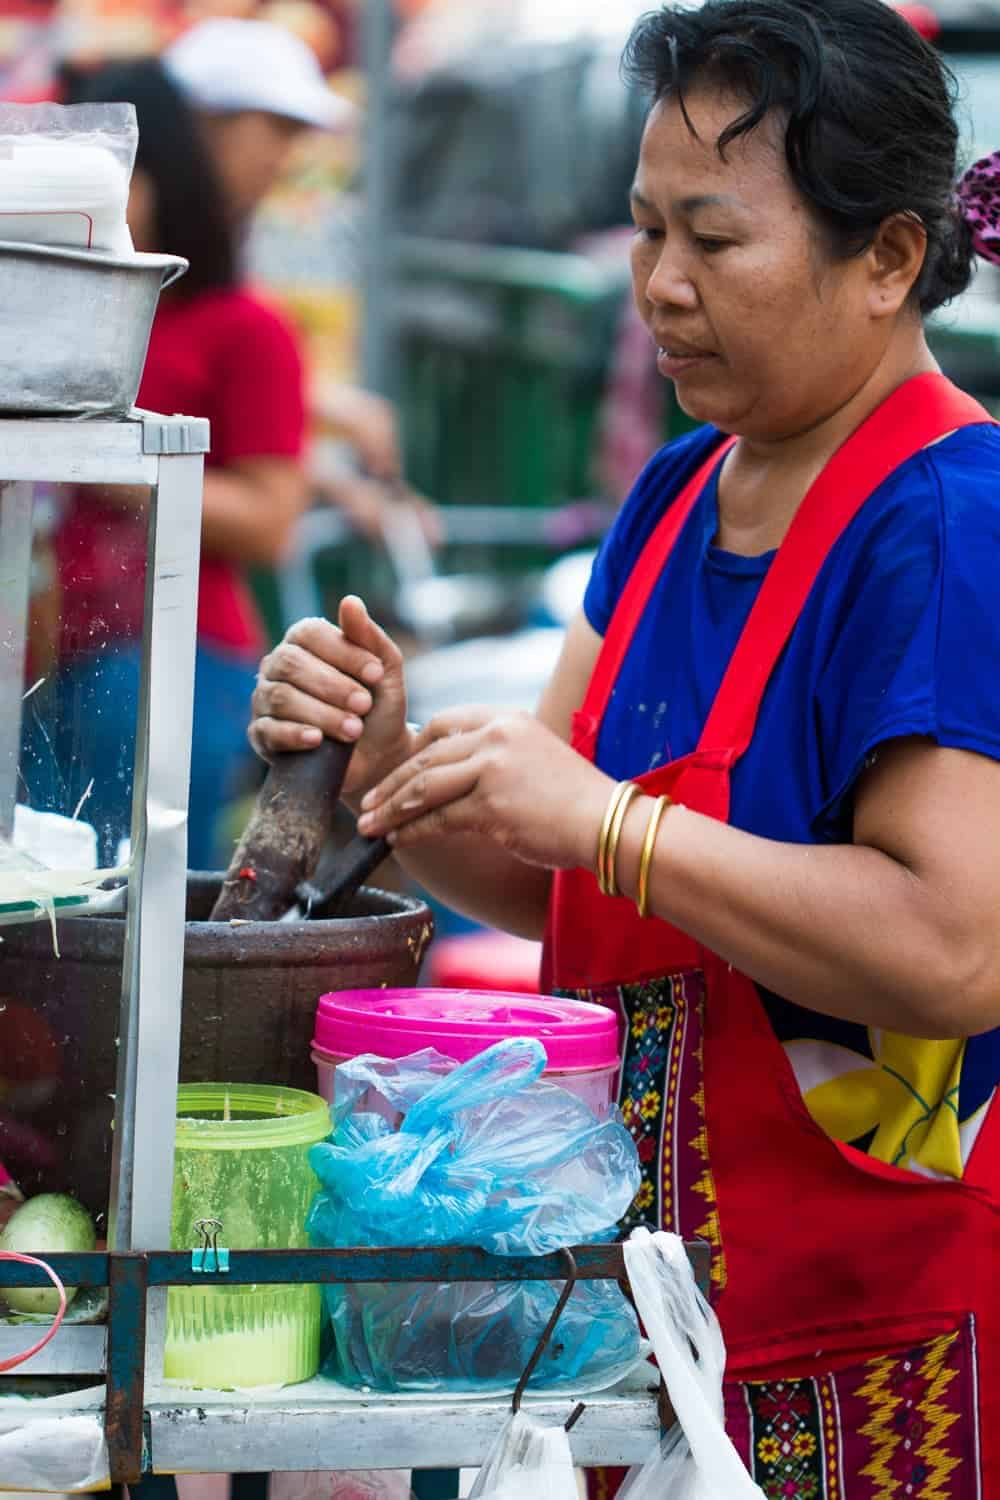 A woman in blue with a red apron cooking street food